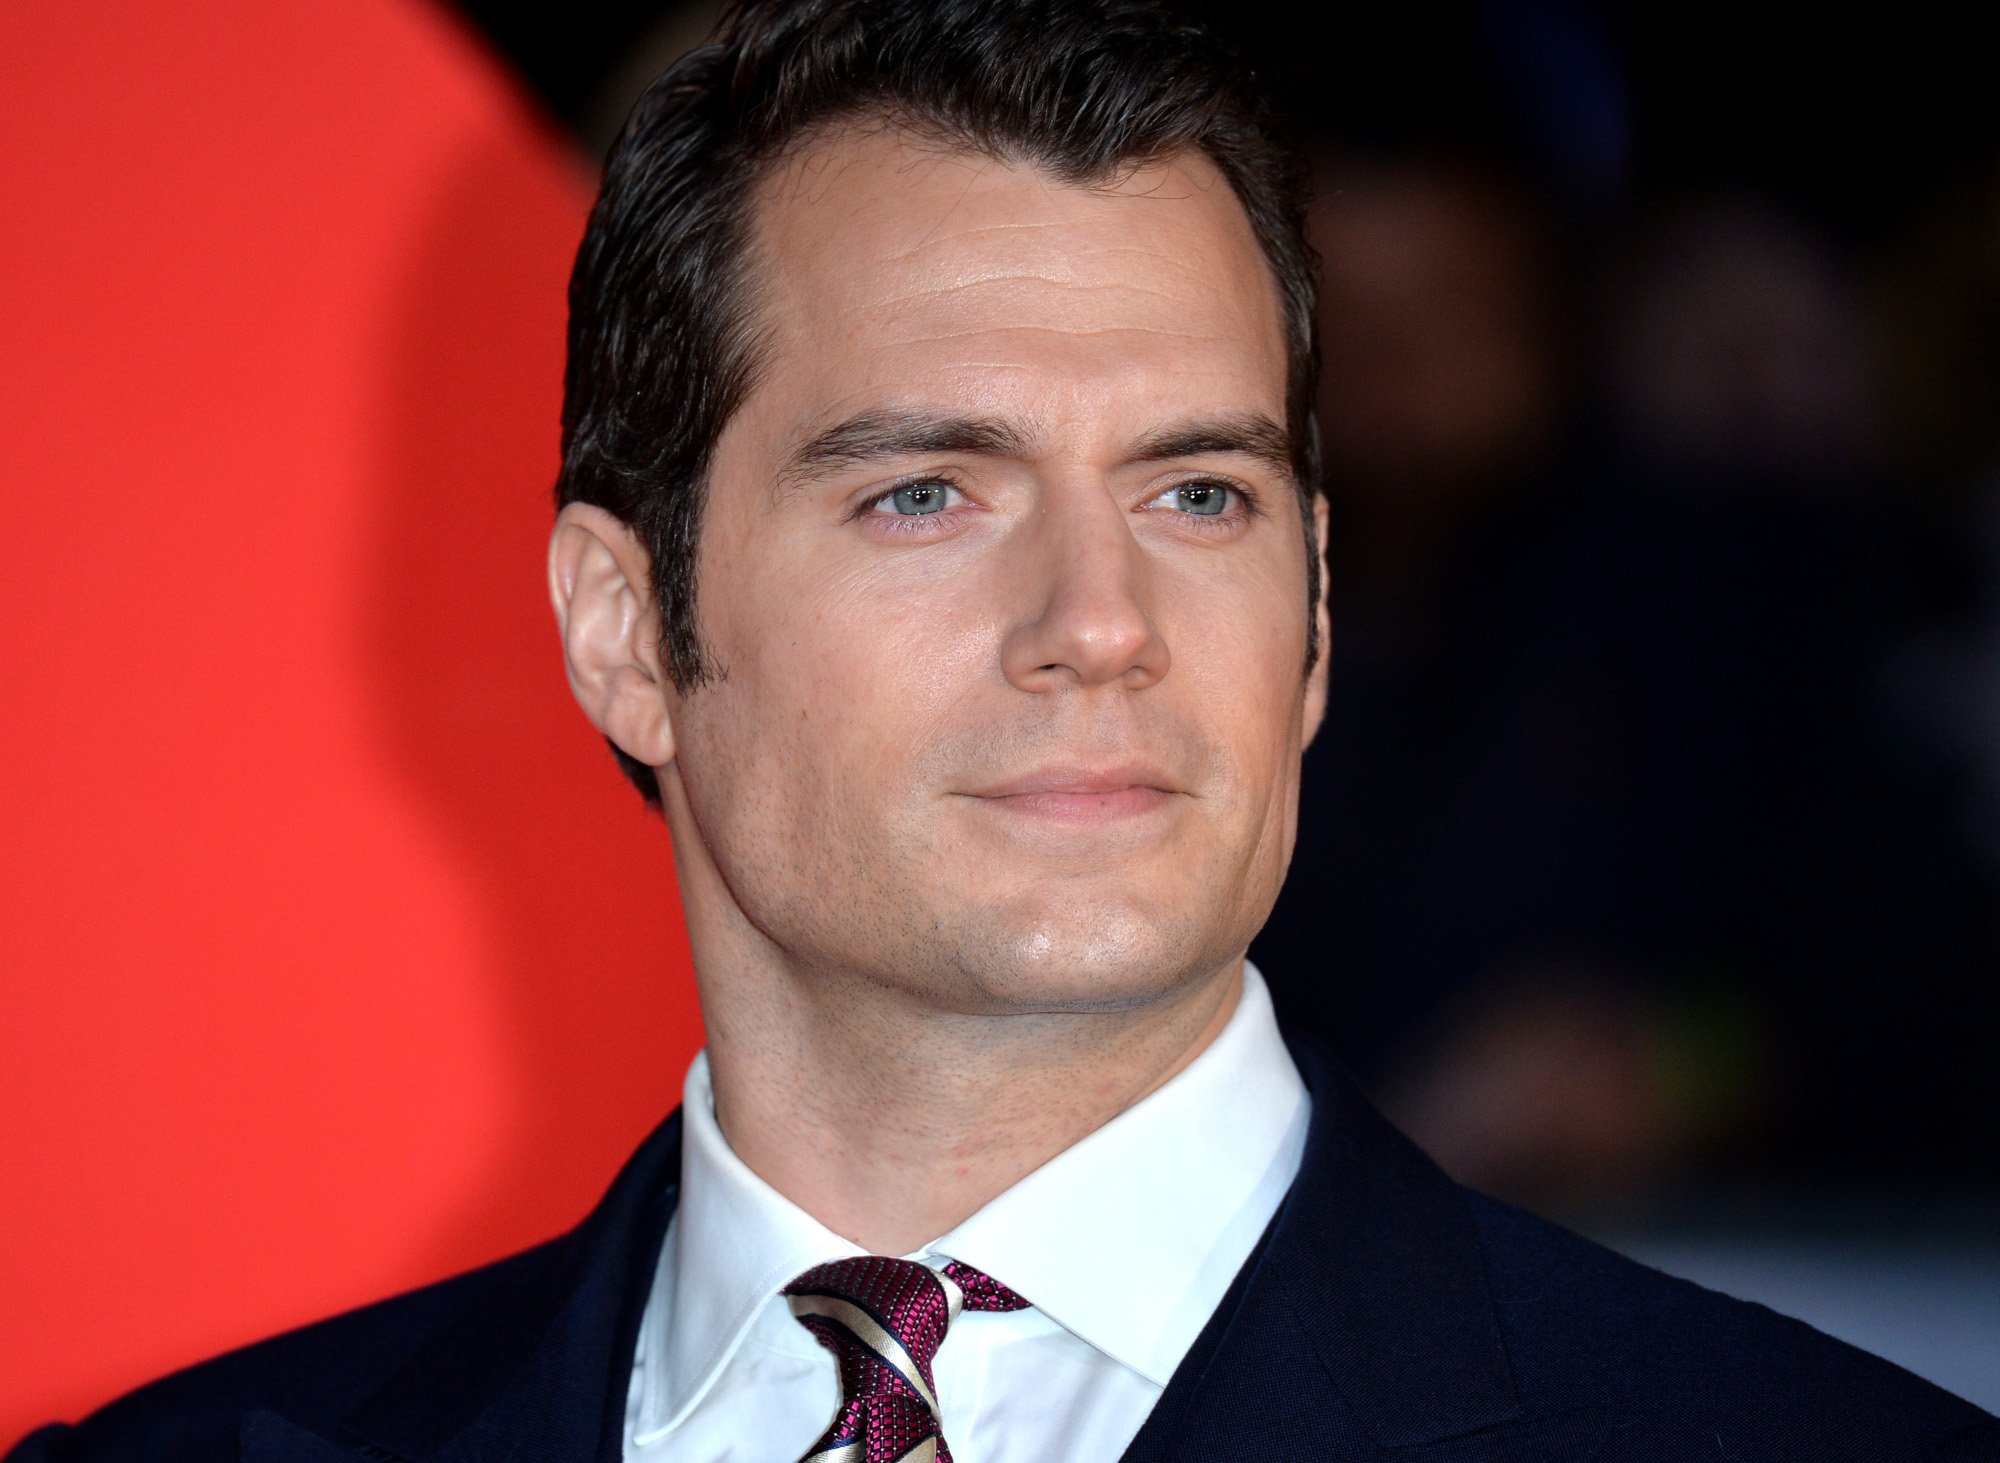 Was there anything wrong with Henry Cavill playing both Clark Kent